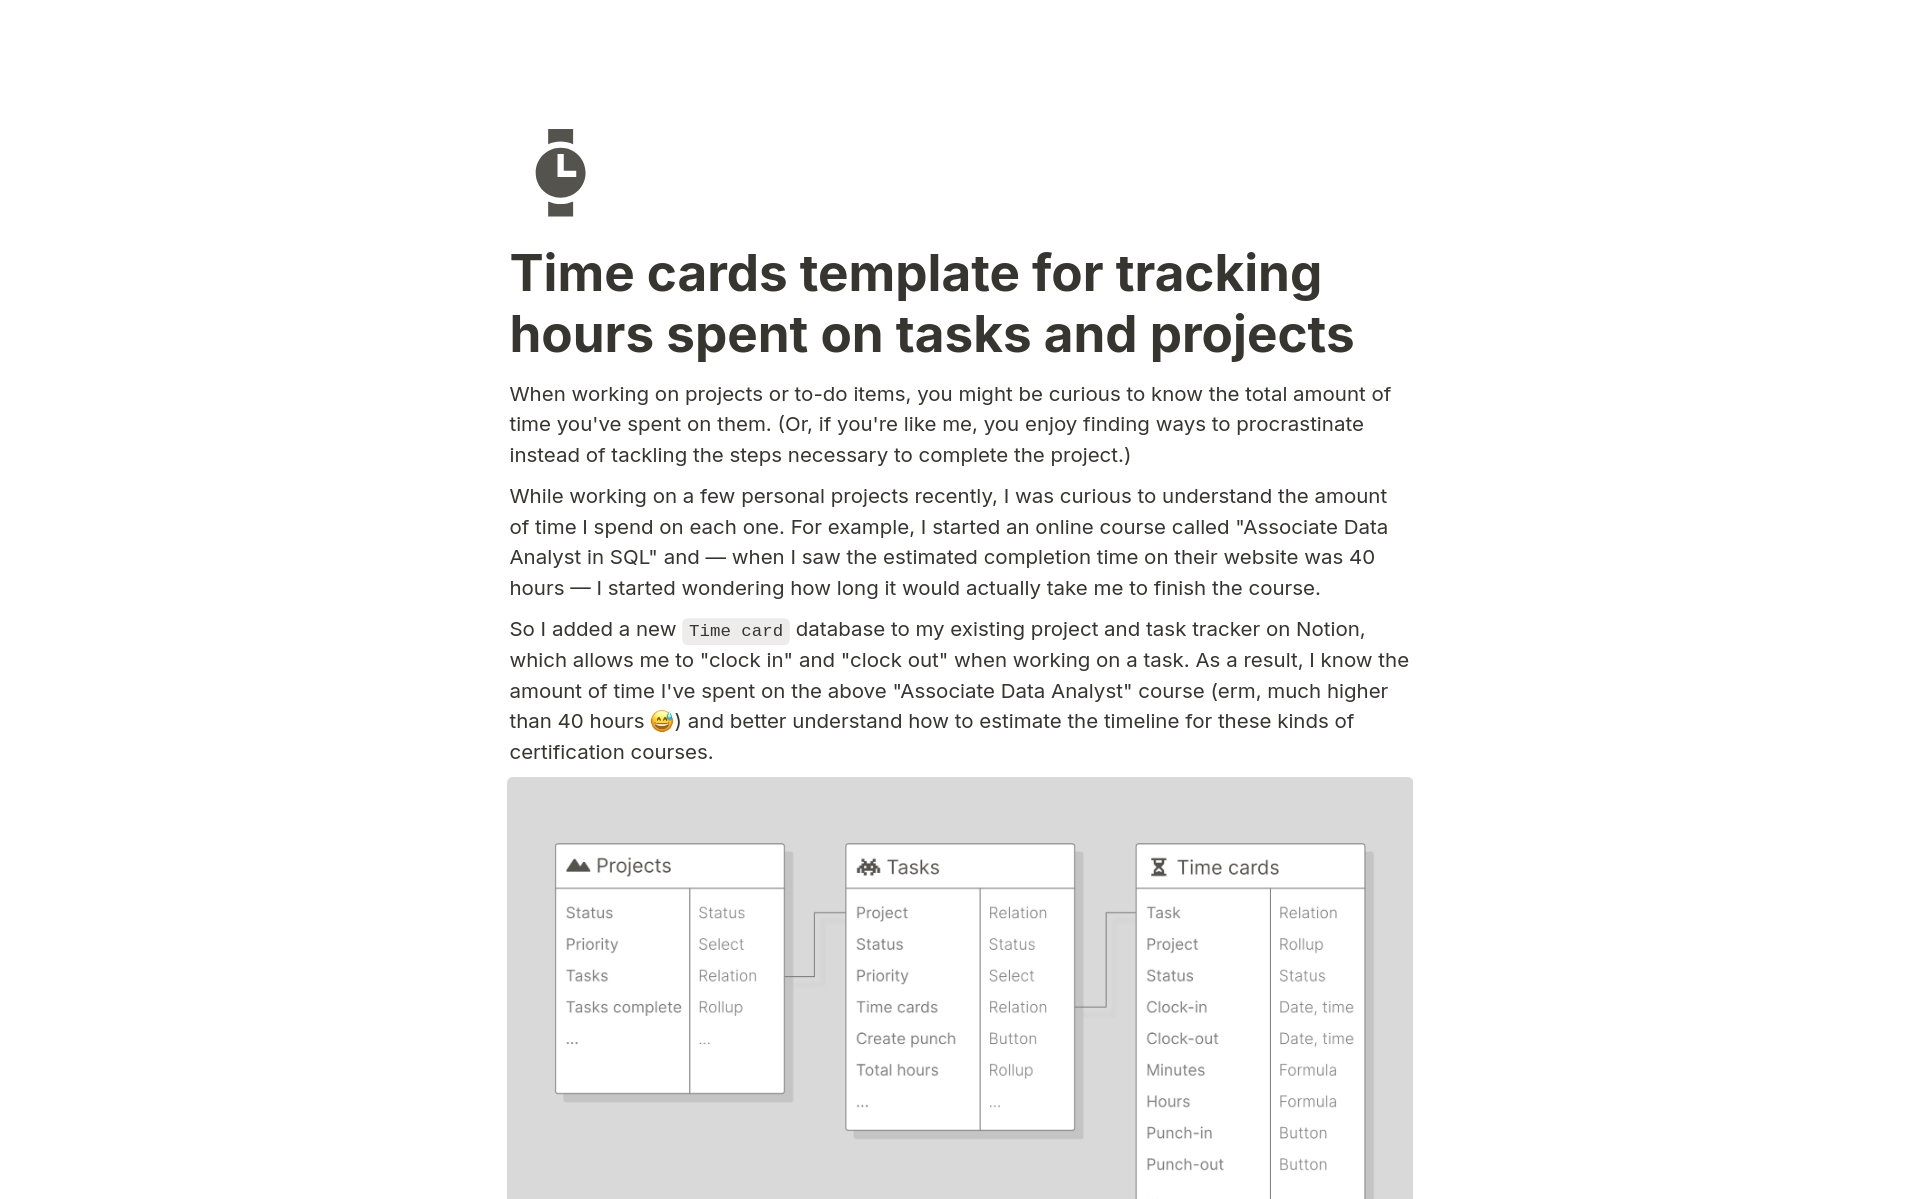 Vista previa de una plantilla para Time cards for tracking hours spent on projects